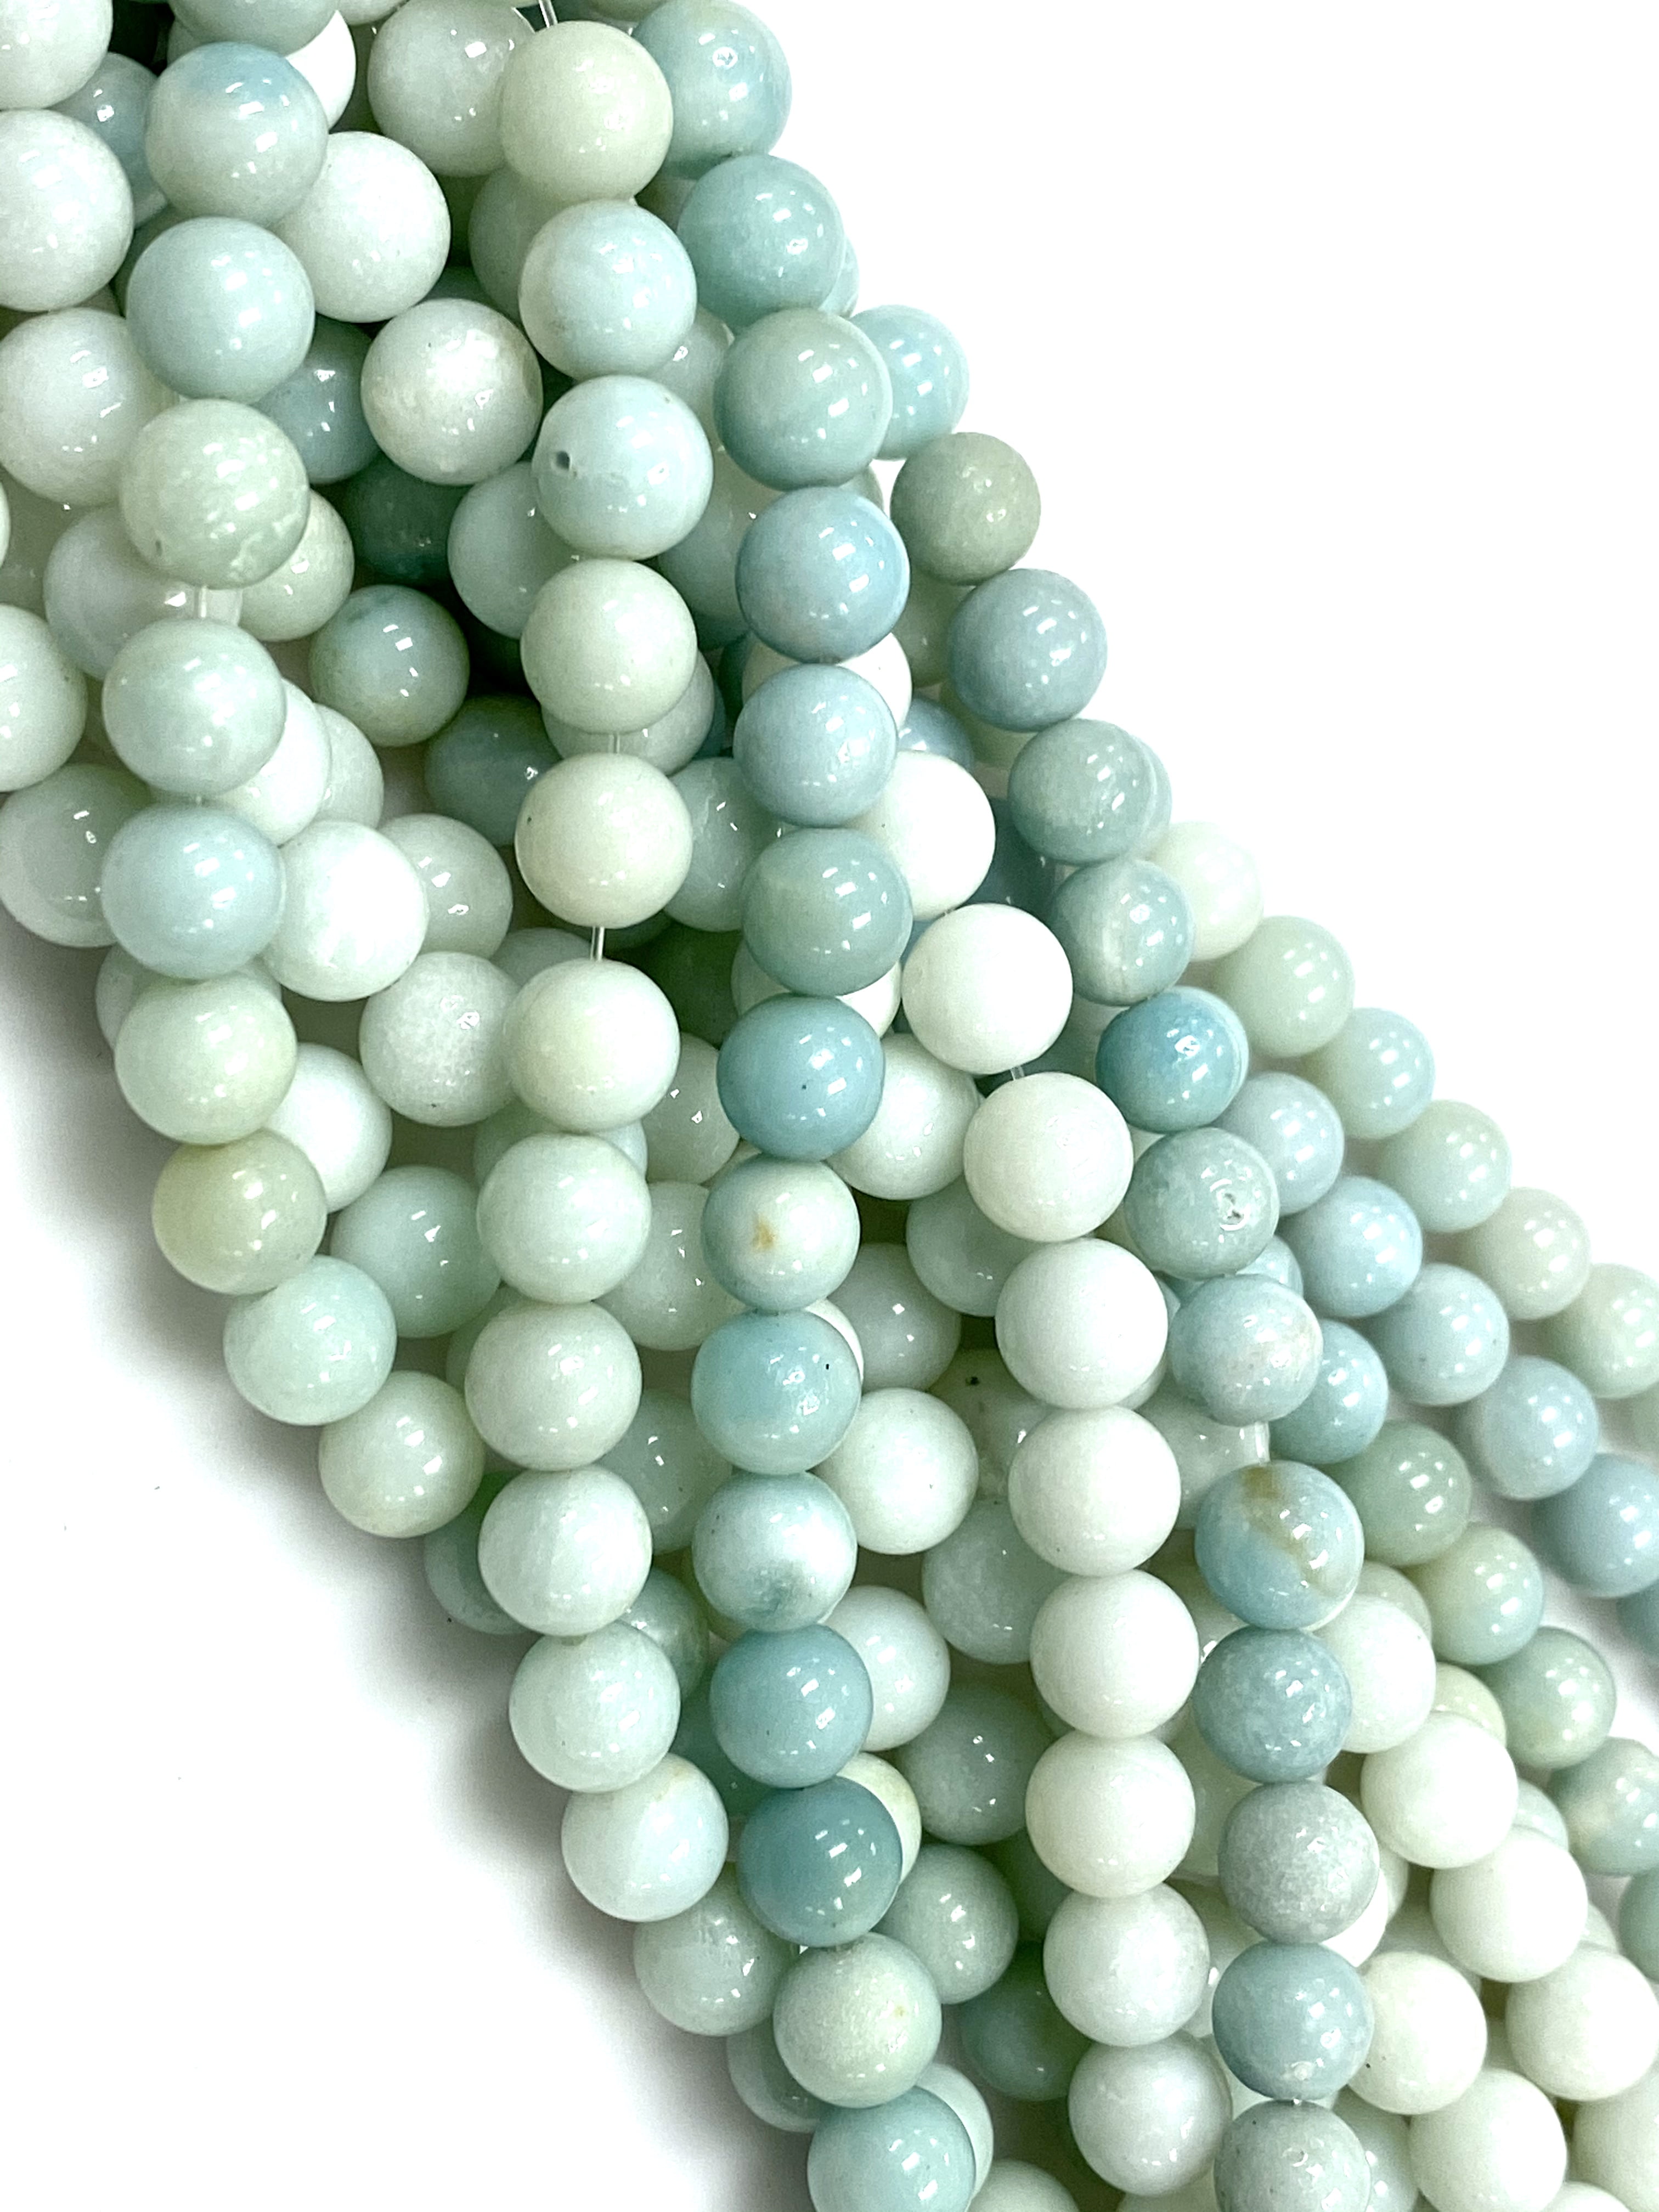 Natural Amazonite Faceted Coin 4 MM Beads Crystals Jewelry Making Loose Gemstone